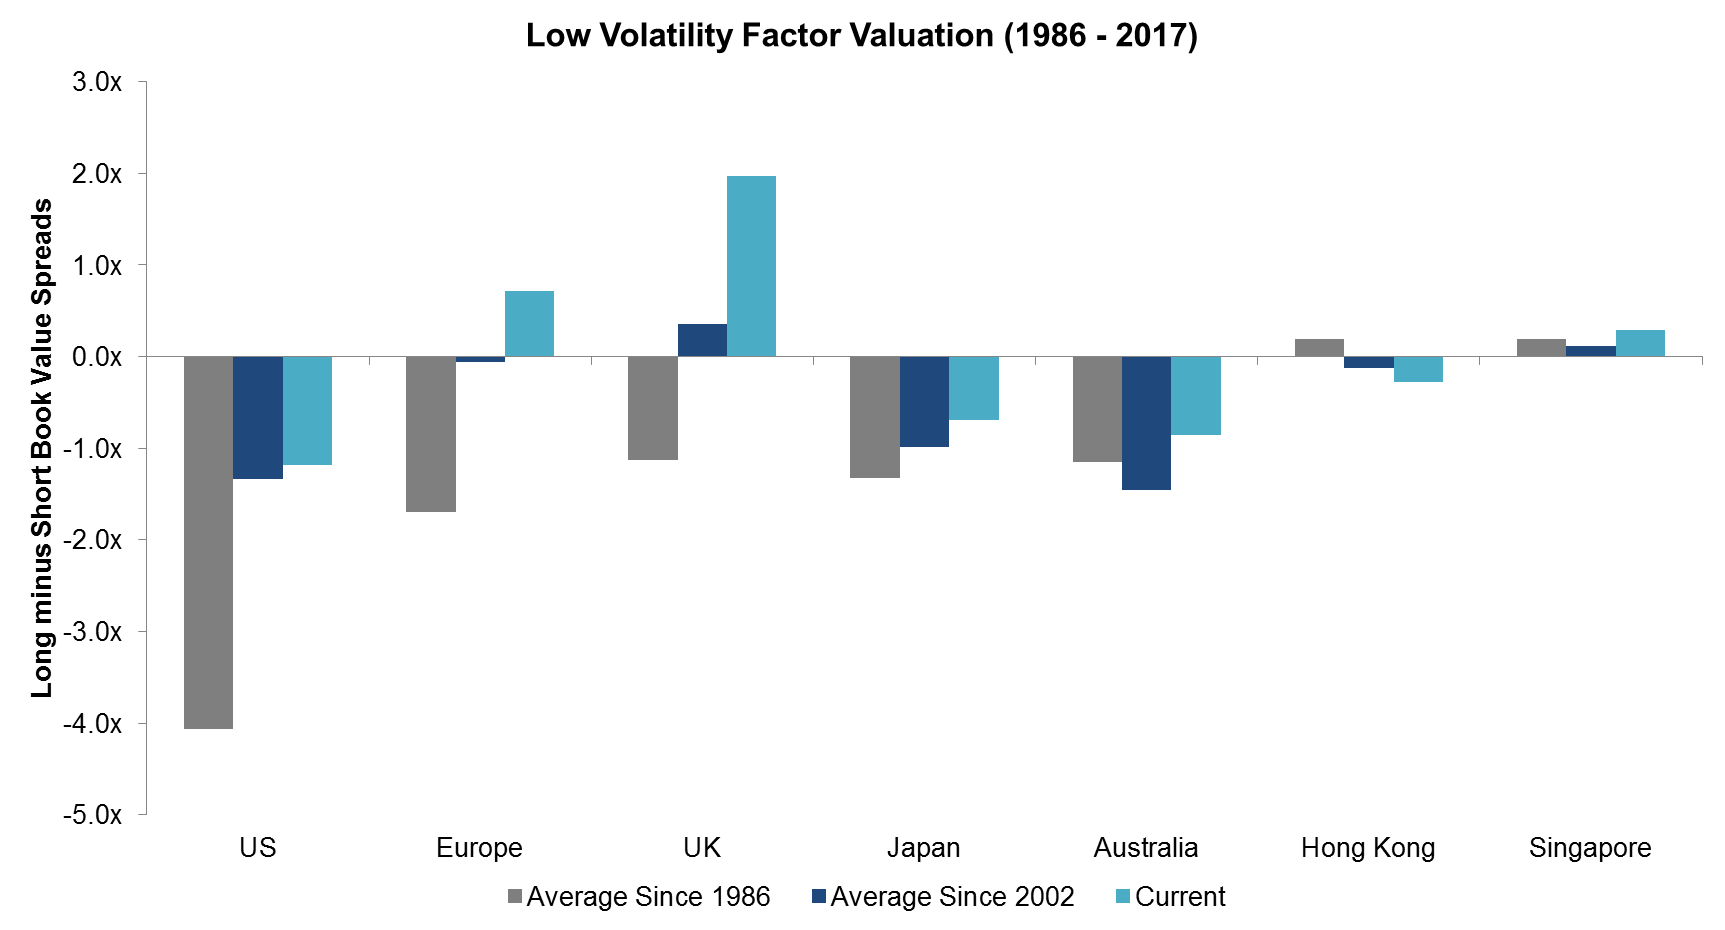 Low Volatility Factor Valuation Averages